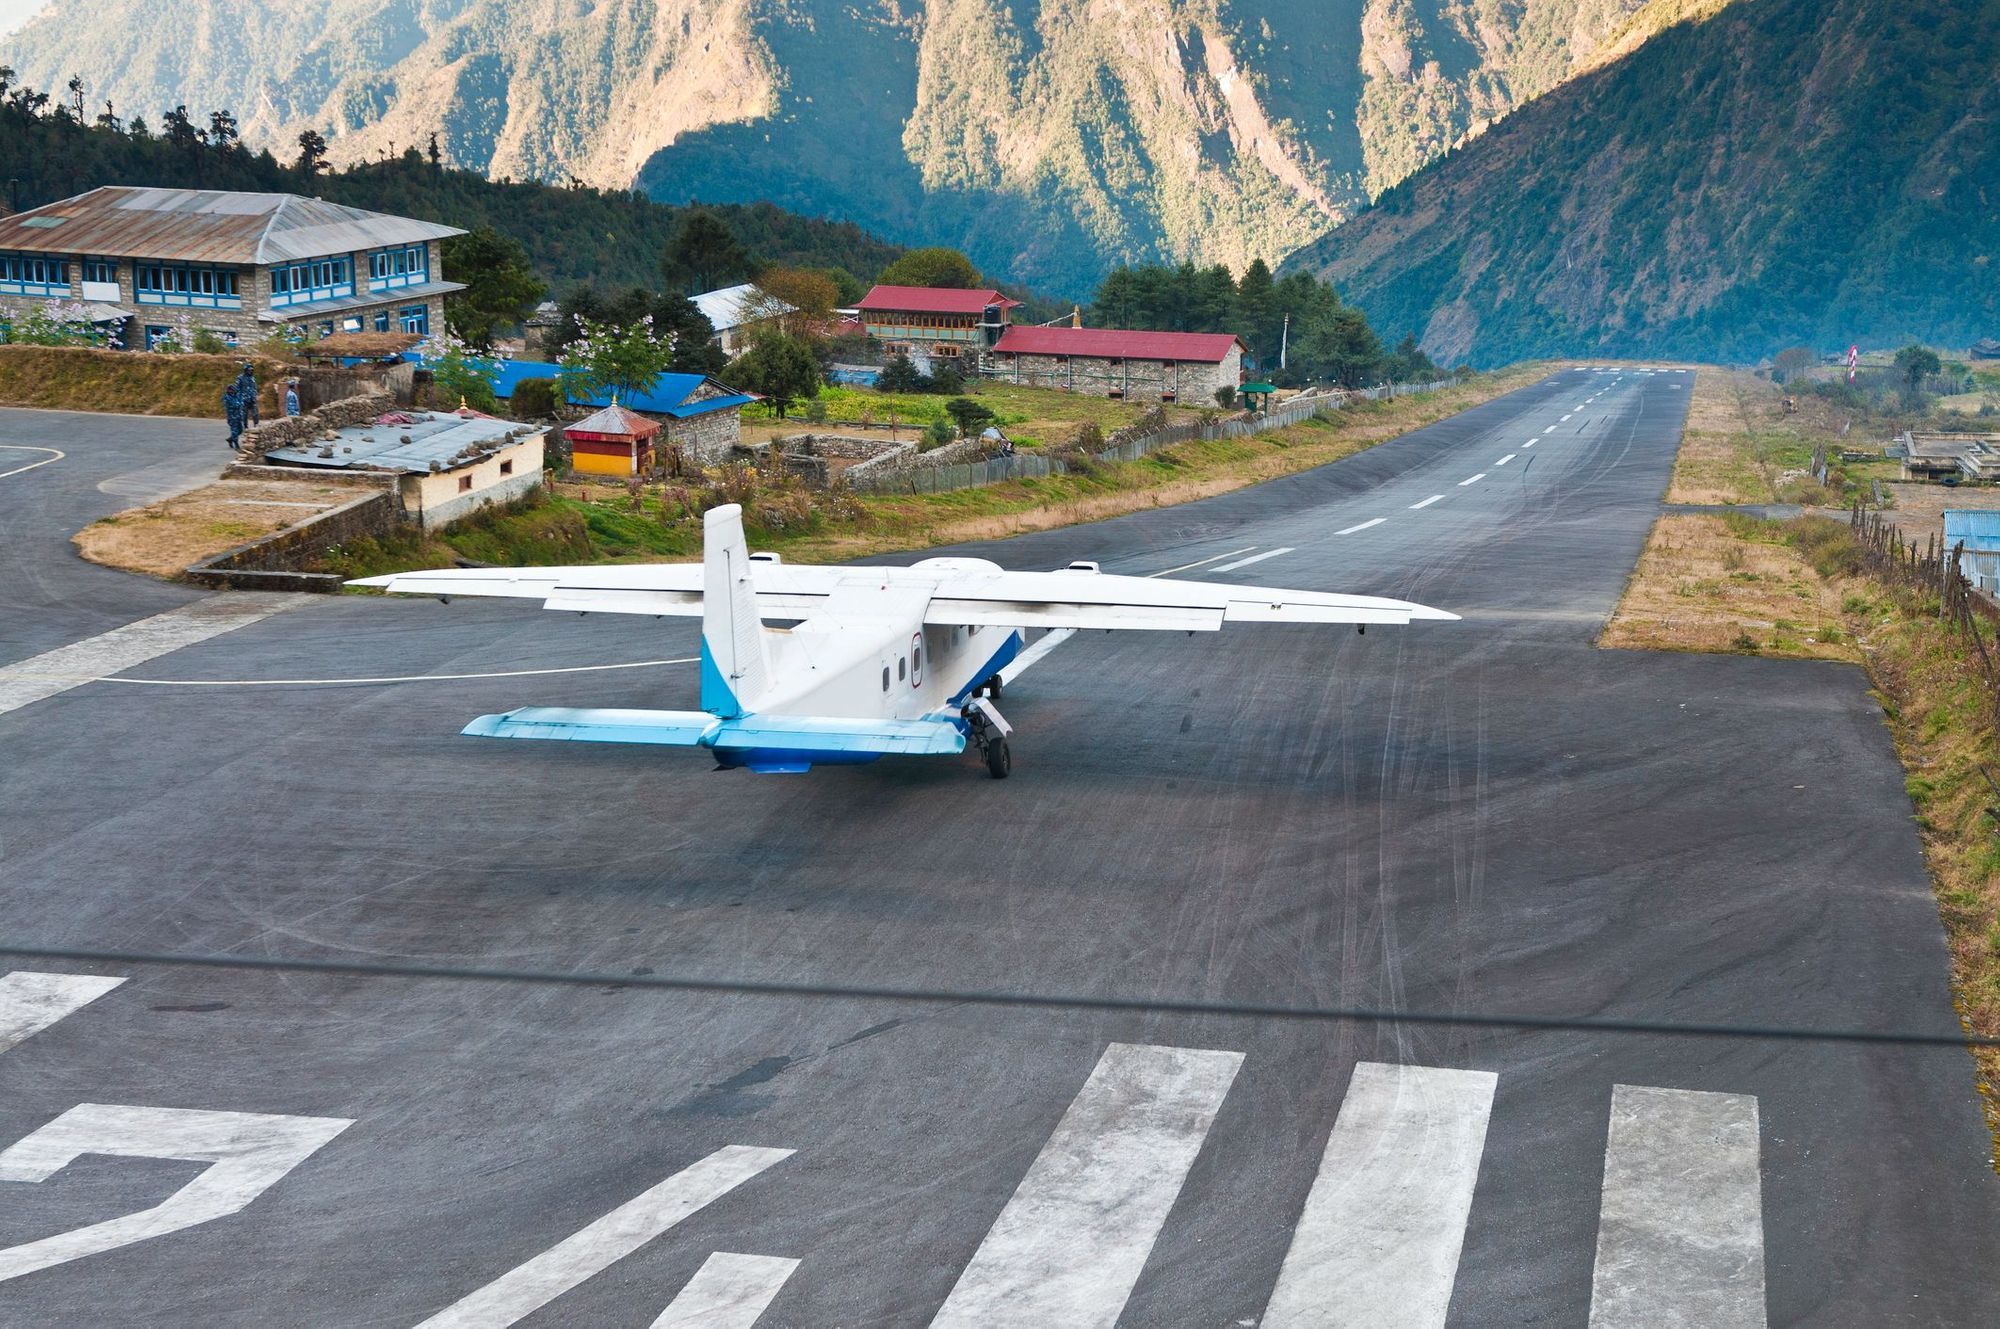 Lukla Airport, Nepal, nicknamed 'the most dangerous airport in the world.'